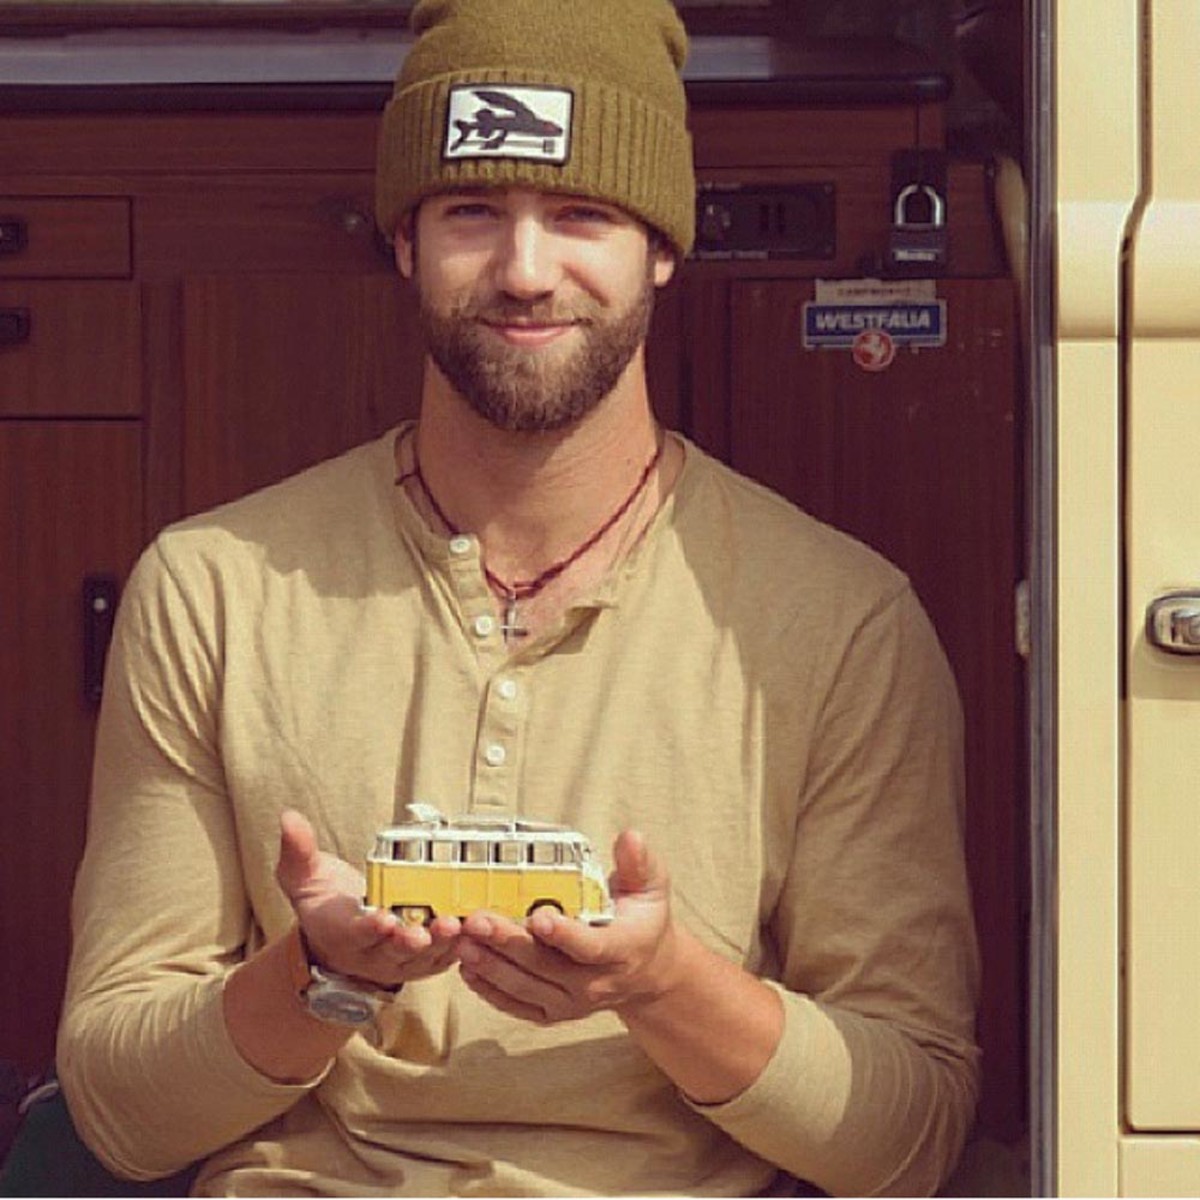 Daniel Norris and MLB DFS: Van-living, epic hair flow, and all the